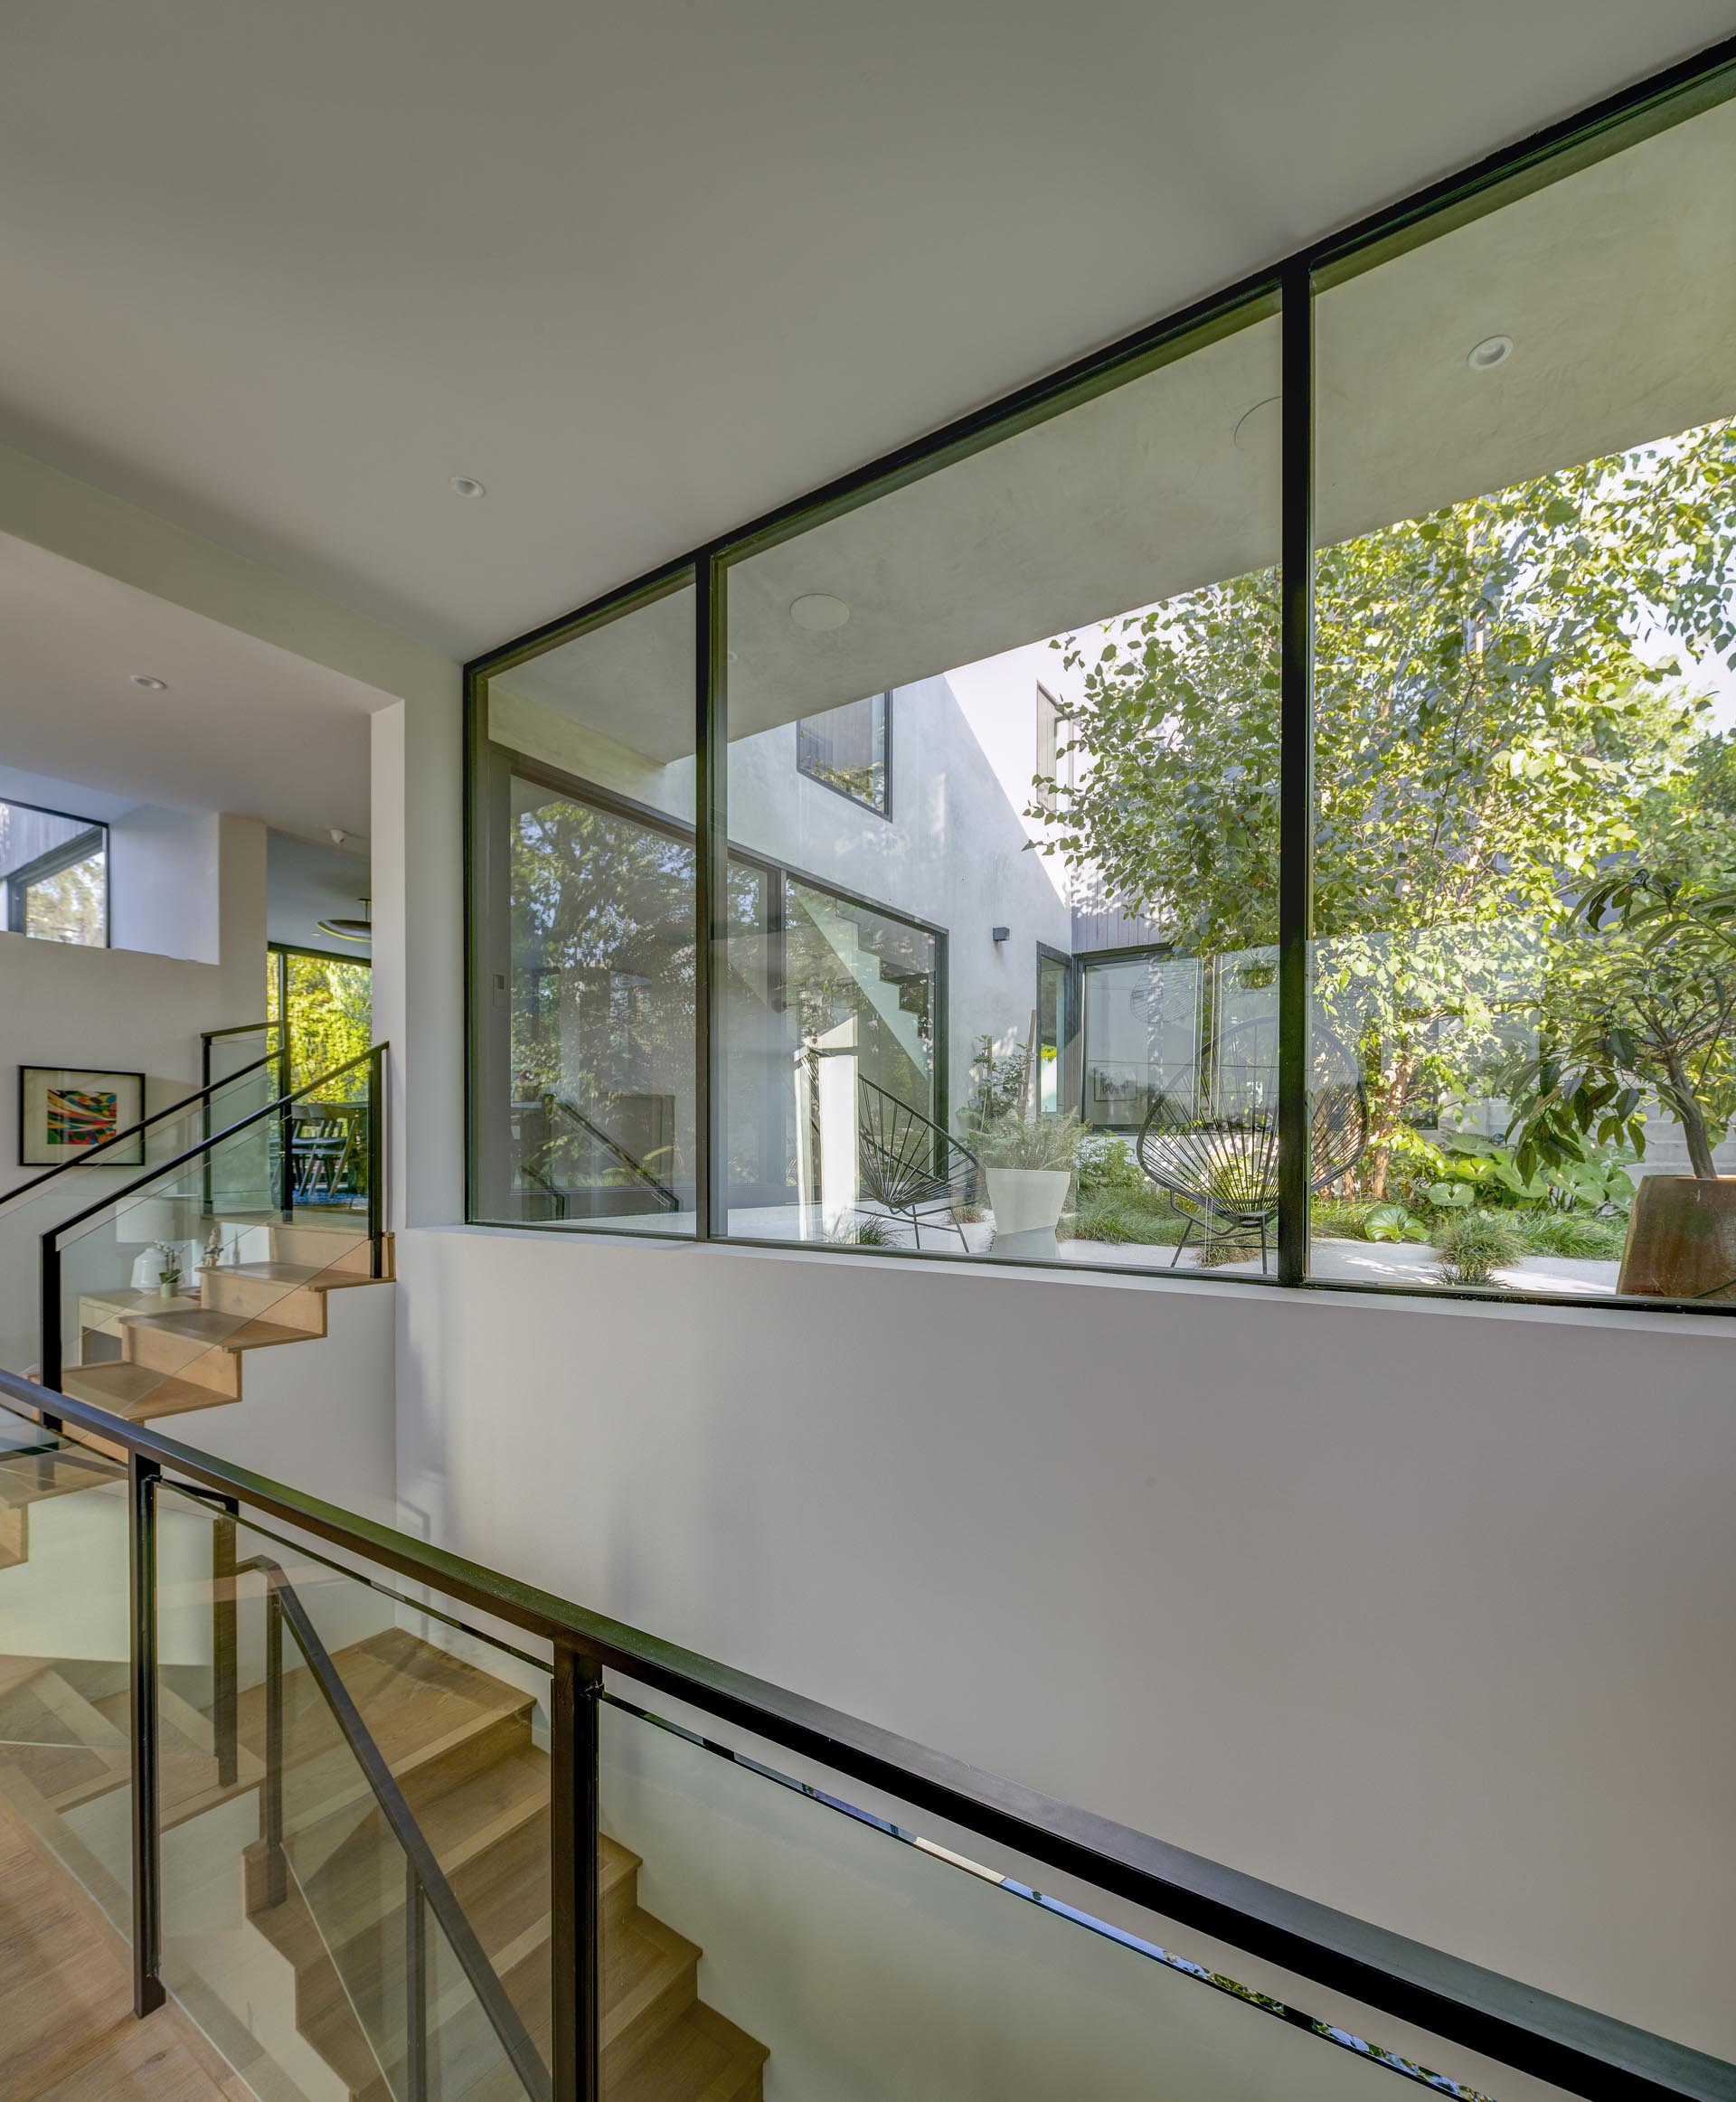 Connecting the various levels of this modern house are wood stairs that have a glass and metal railing.